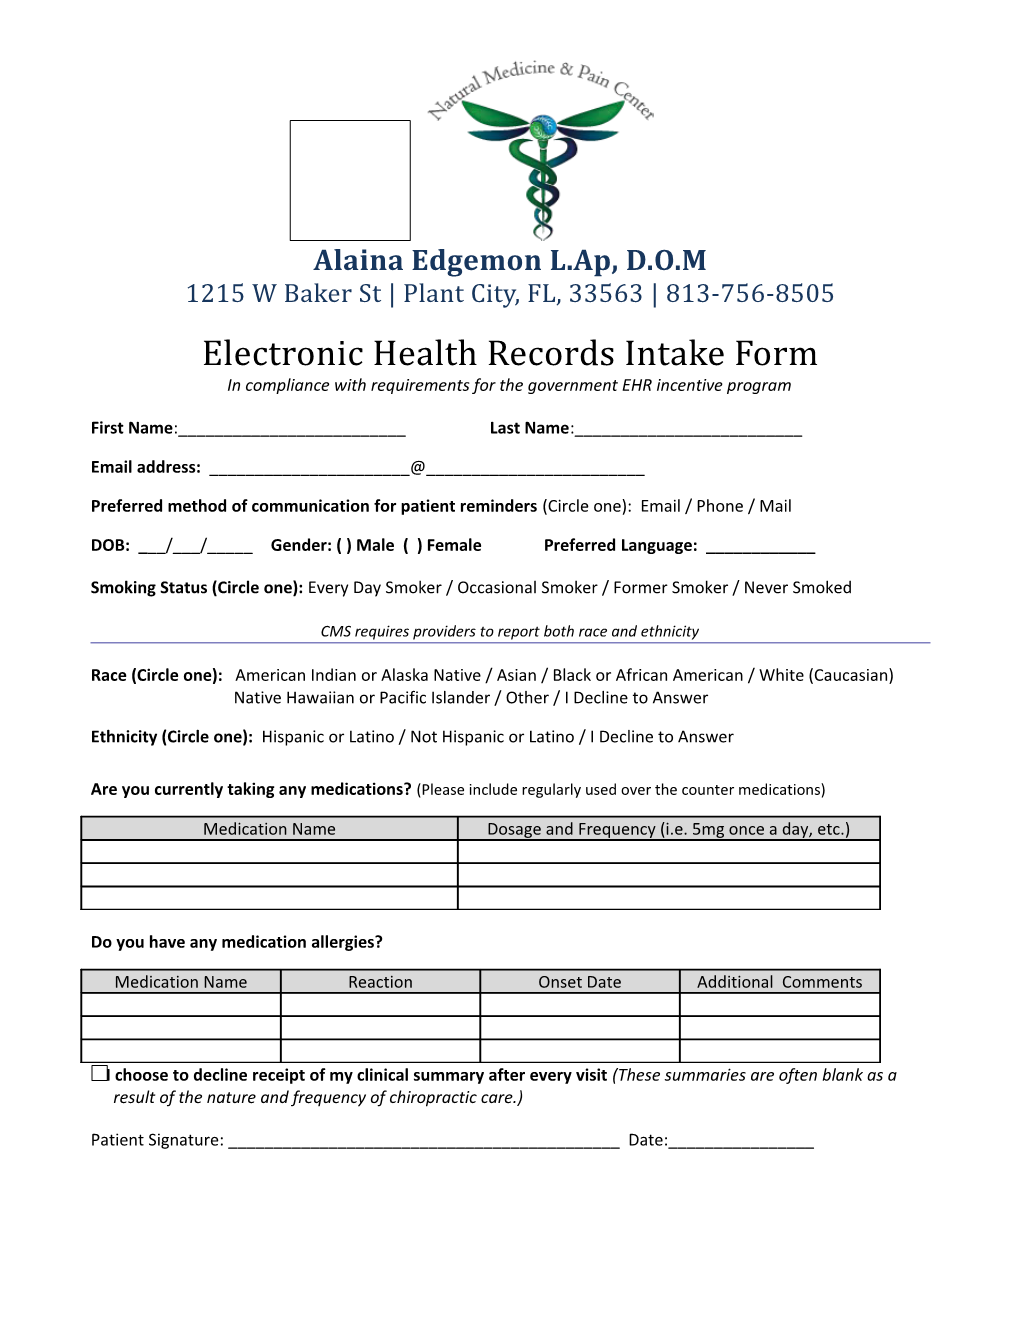 Electronic Health Records Intake Form